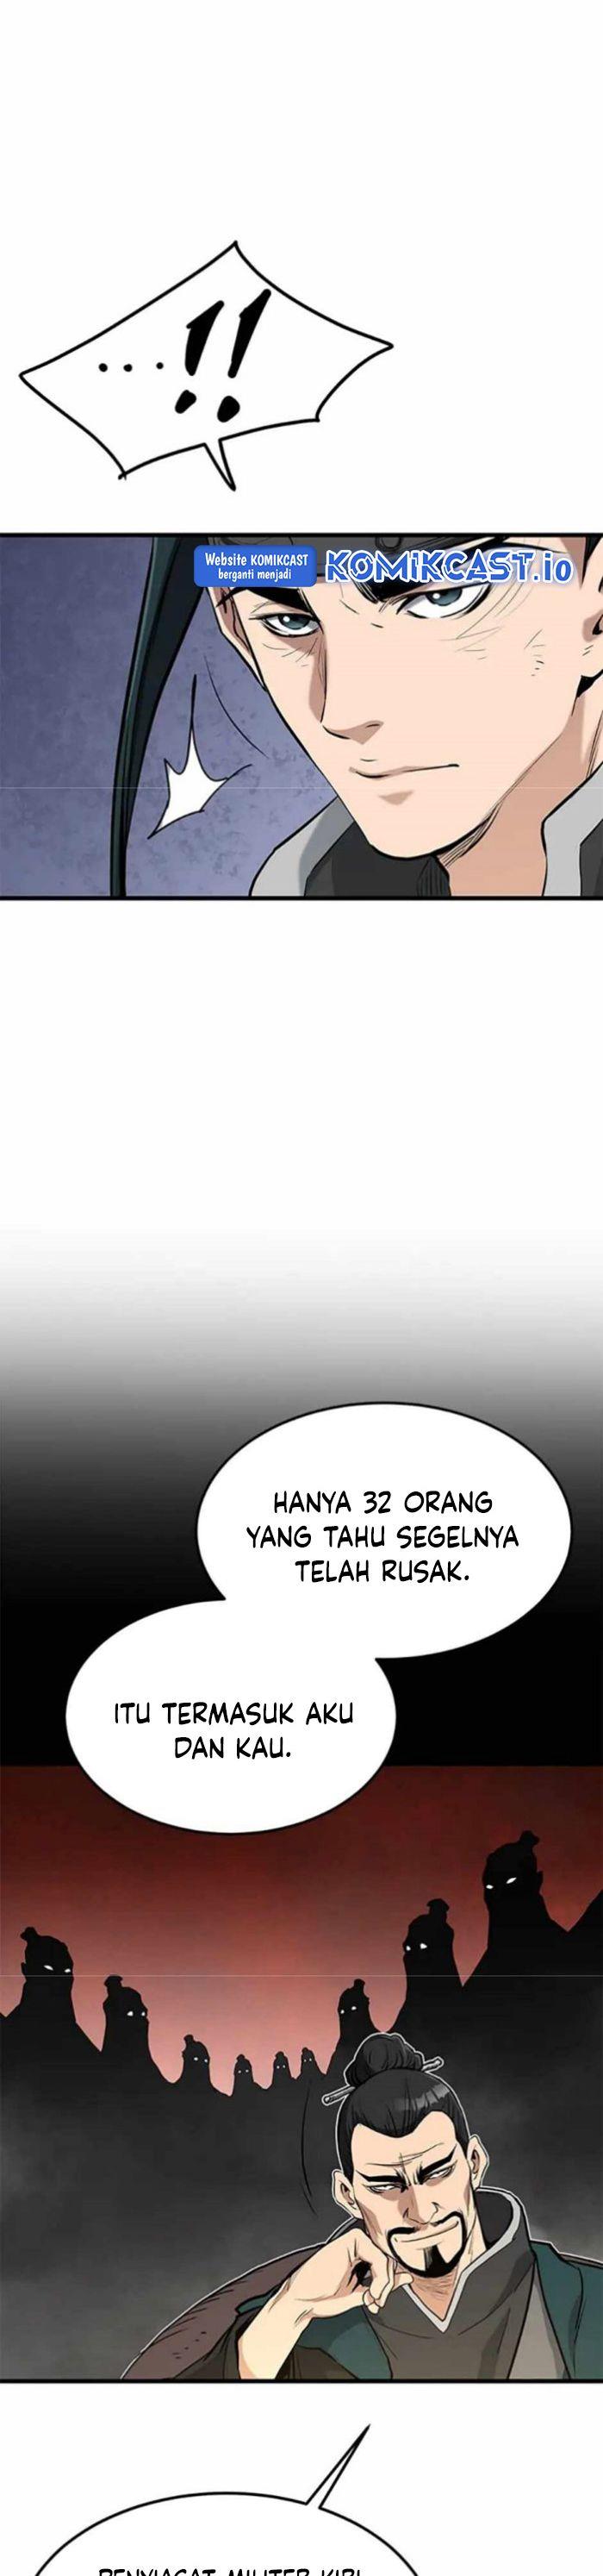 Grand General Chapter 73